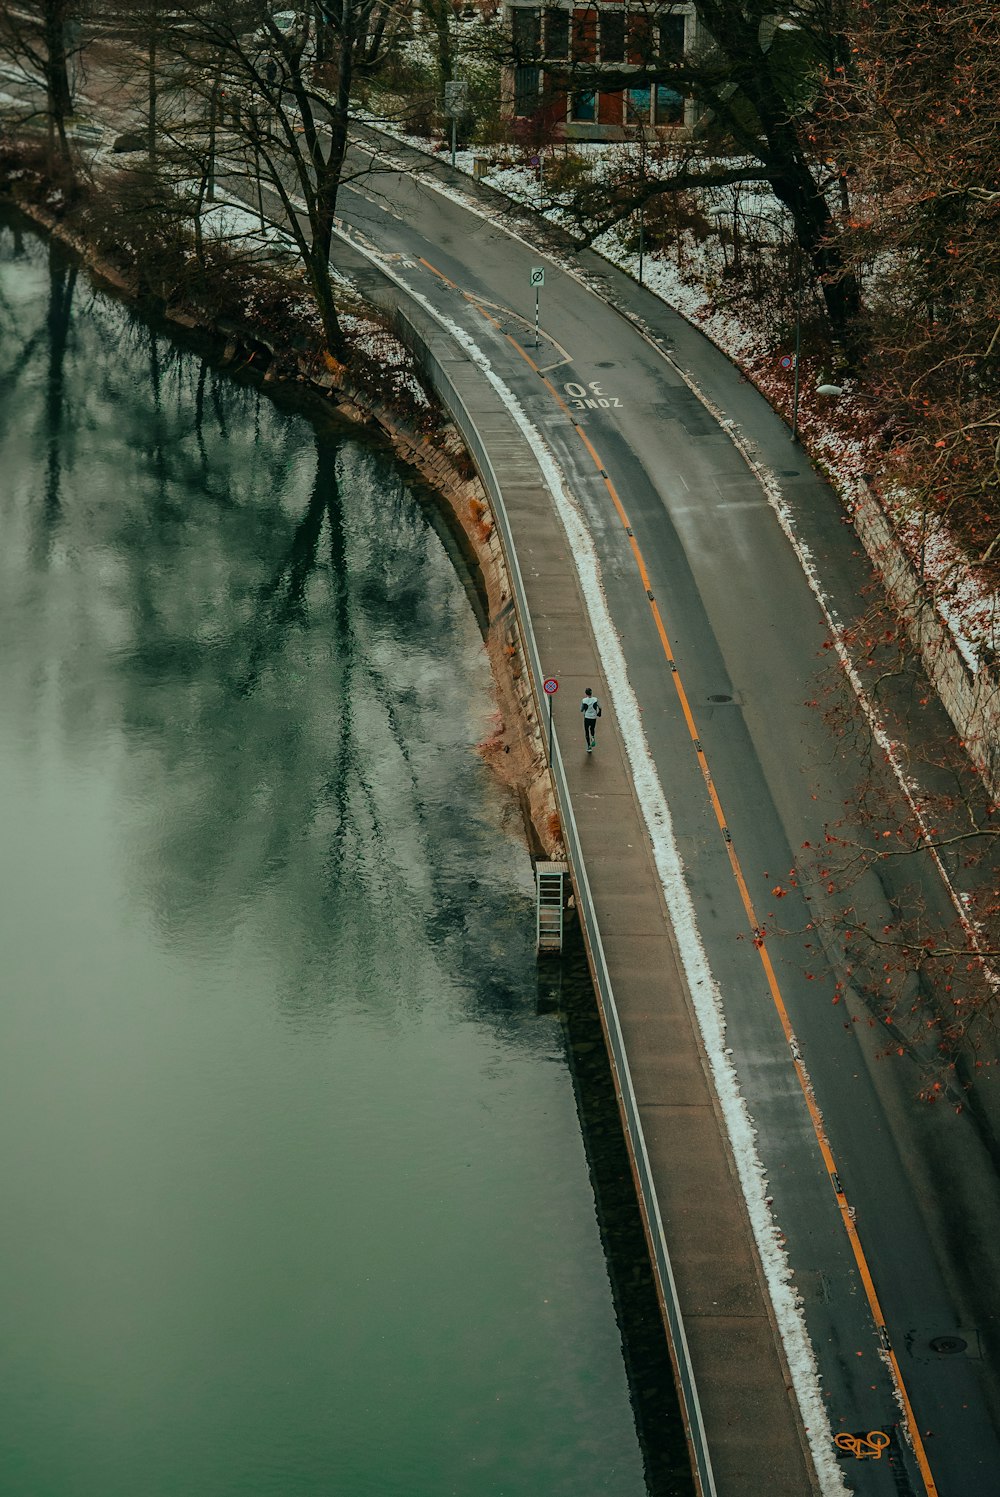 a person riding a bike down a road next to a body of water